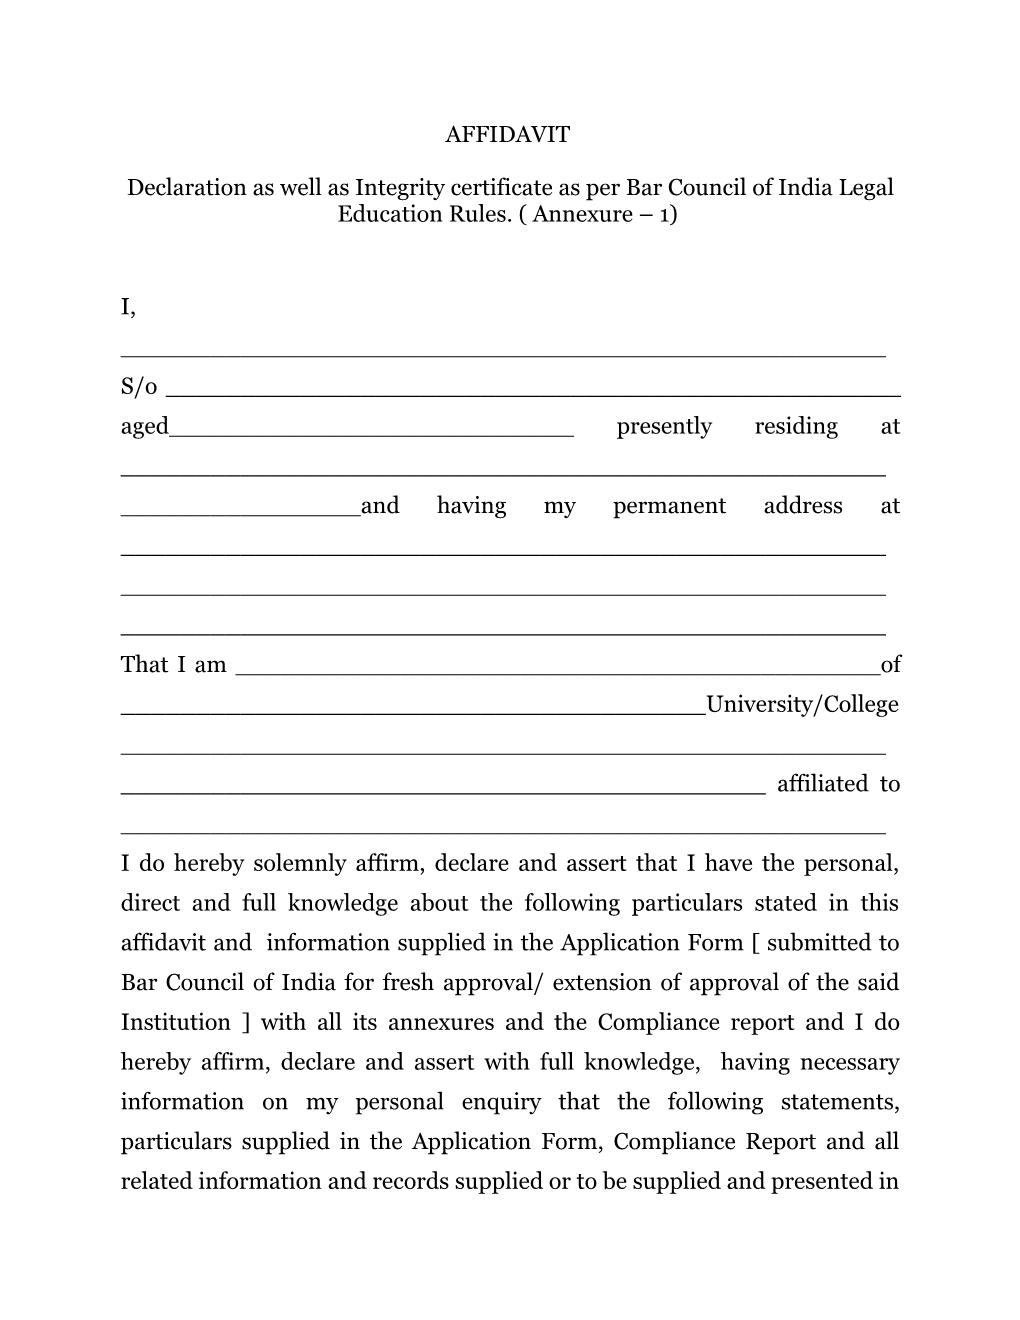 Declaration As Well As Integrity Certificate As Per Bar Council of India Legal Education